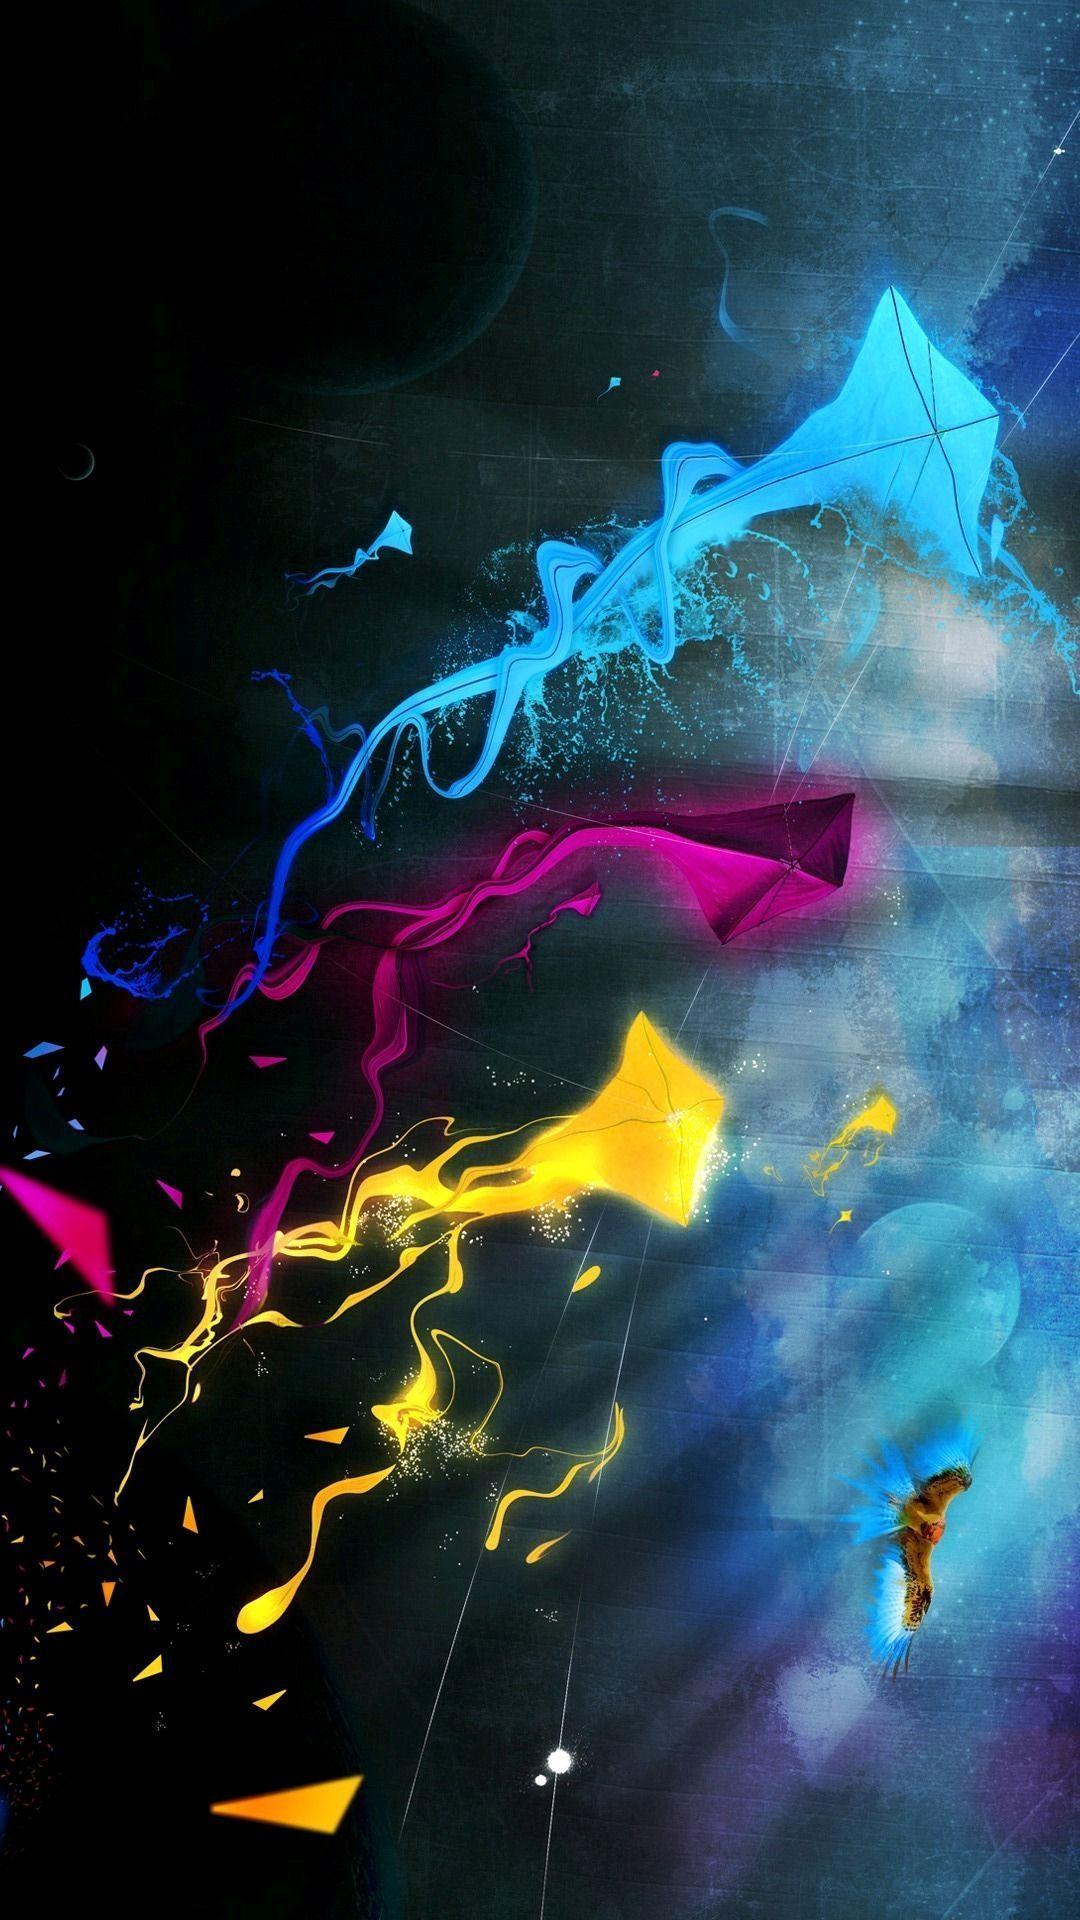 Mobile Phone Wallpapers - Top Free